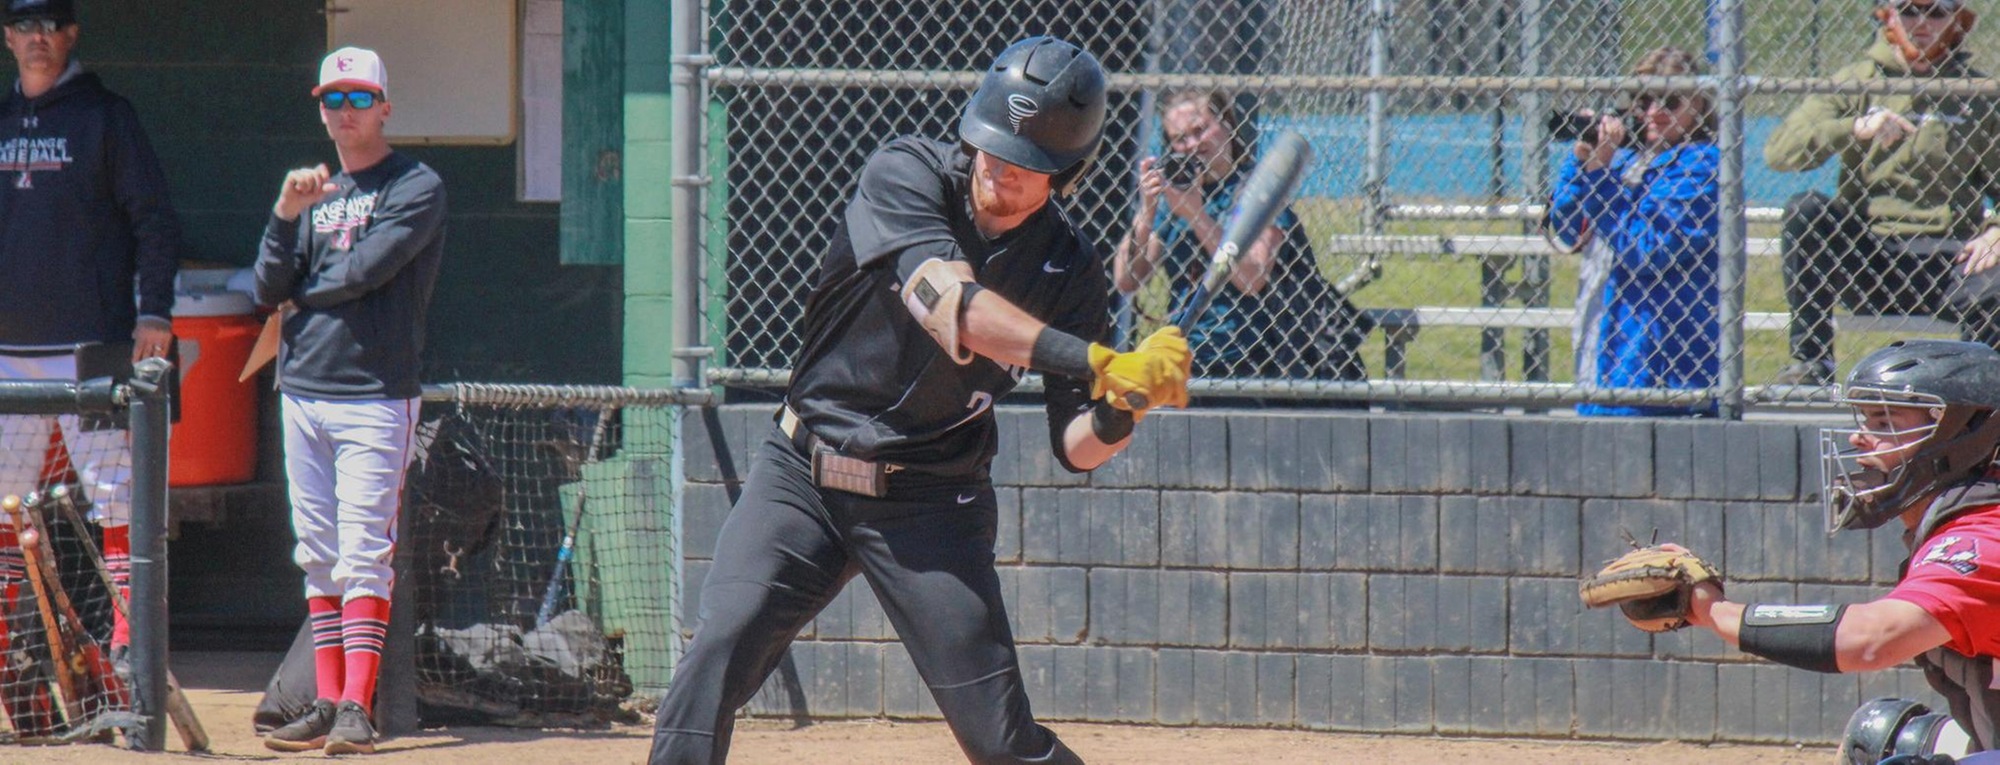 Tornados Drop Doubleheader on the Road in Toccoa